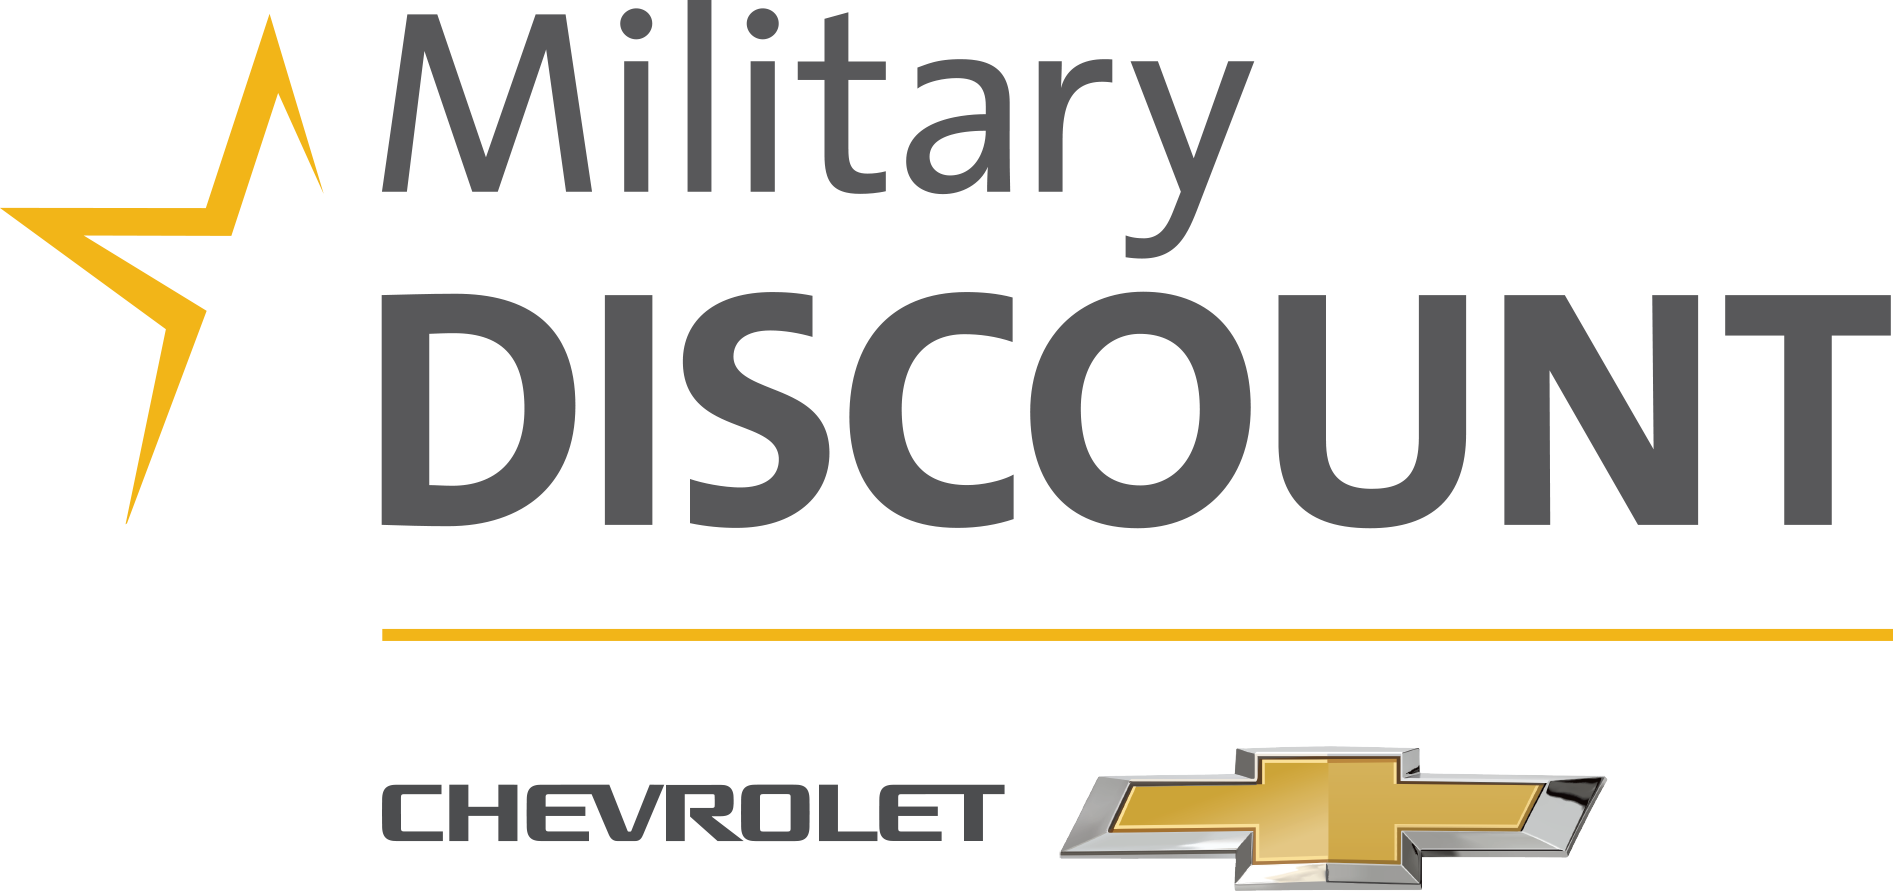 Military Discount at Weber Chevrolet in St. Louis MO